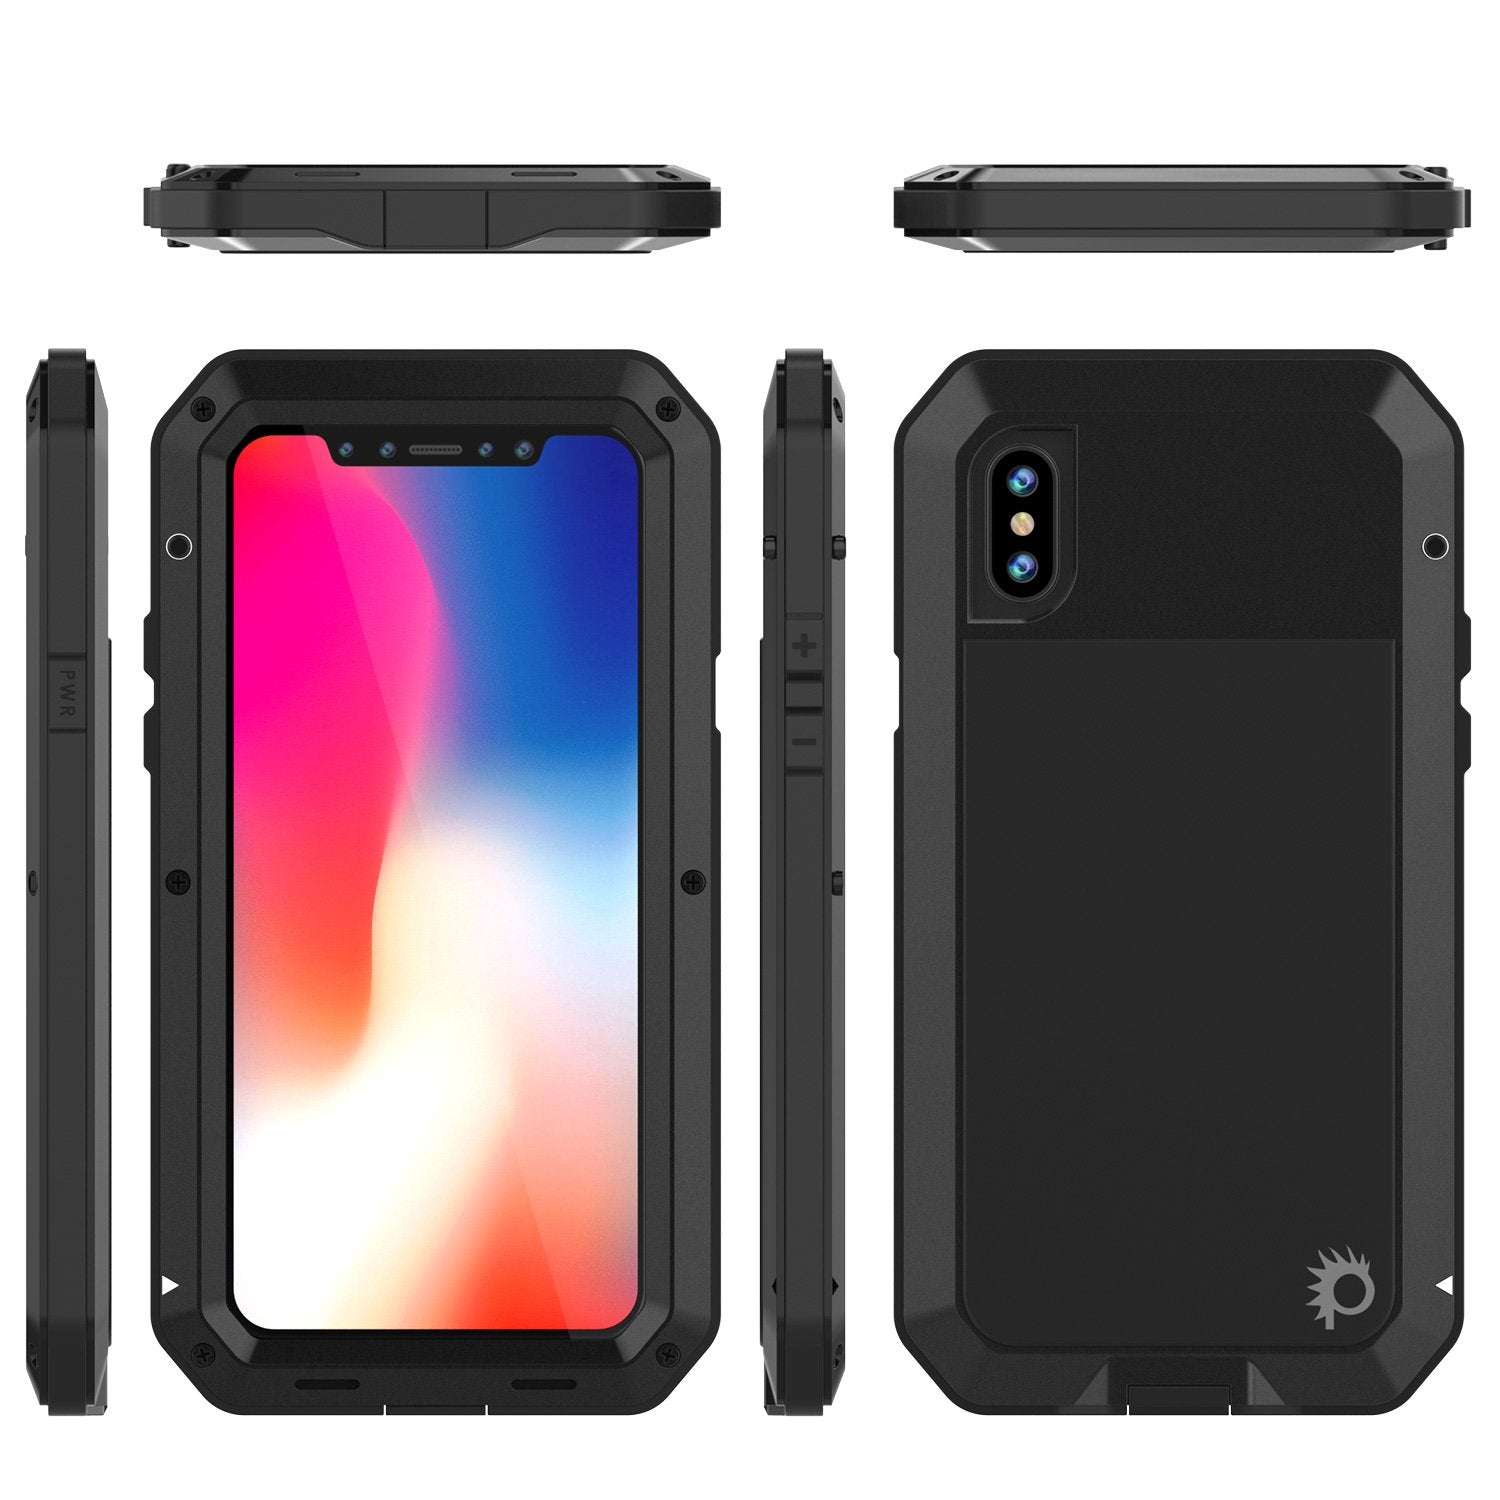 iPhone X Metal Case, Heavy Duty Military Grade Rugged Armor Cover [shock proof] Hybrid Full Body Hard Aluminum & TPU Design [non slip] W/ Prime Drop Protection for Apple iPhone 10 [Black]